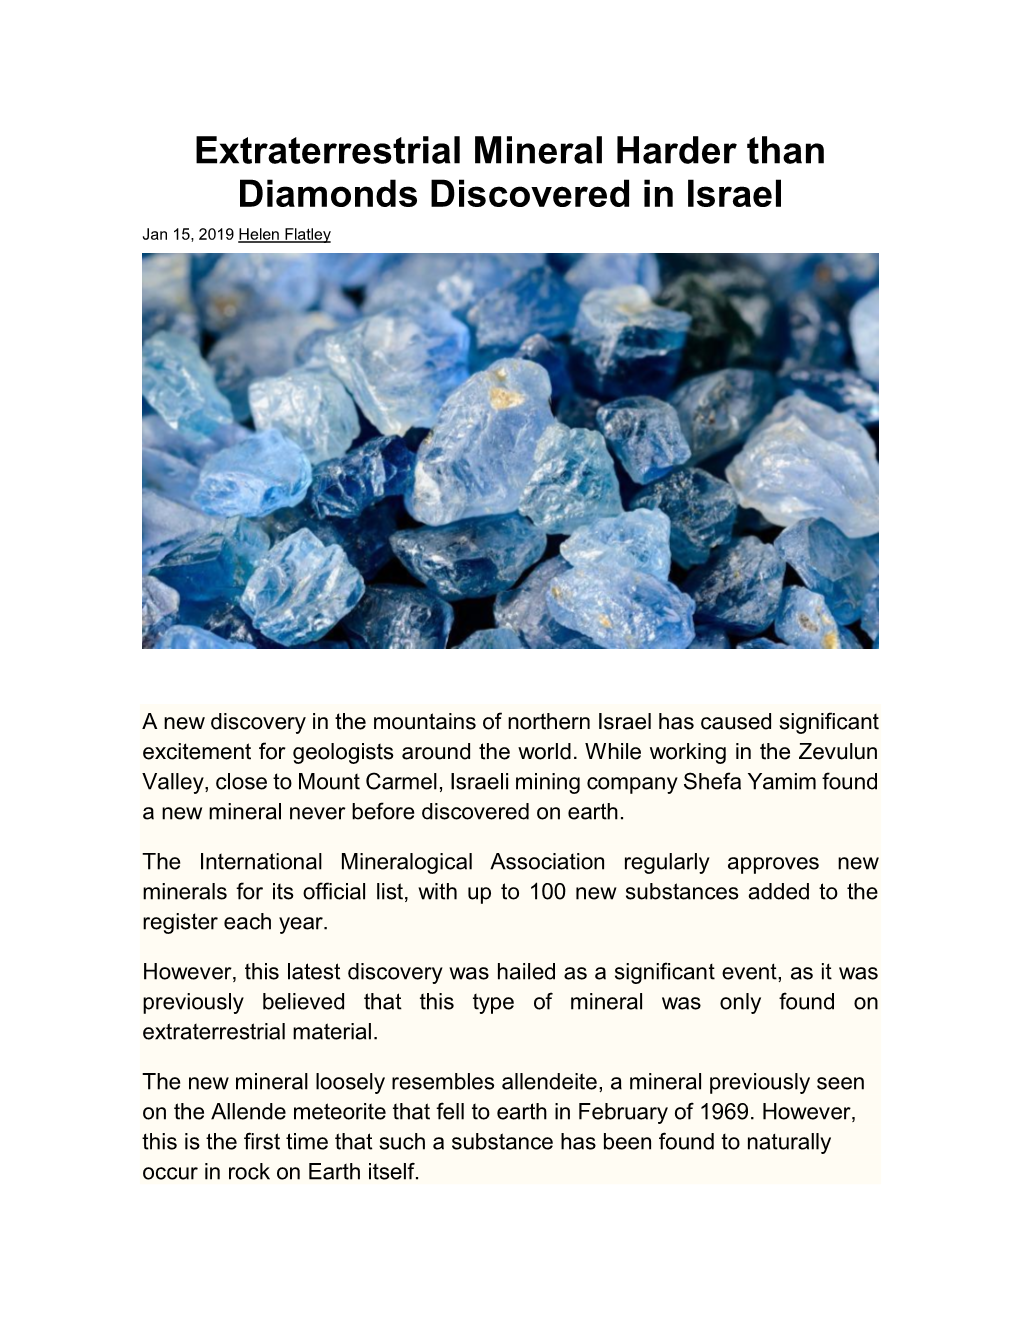 Extraterrestrial Mineral Harder Than Diamonds Discovered in Israel Jan 15, 2019 Helen Flatley